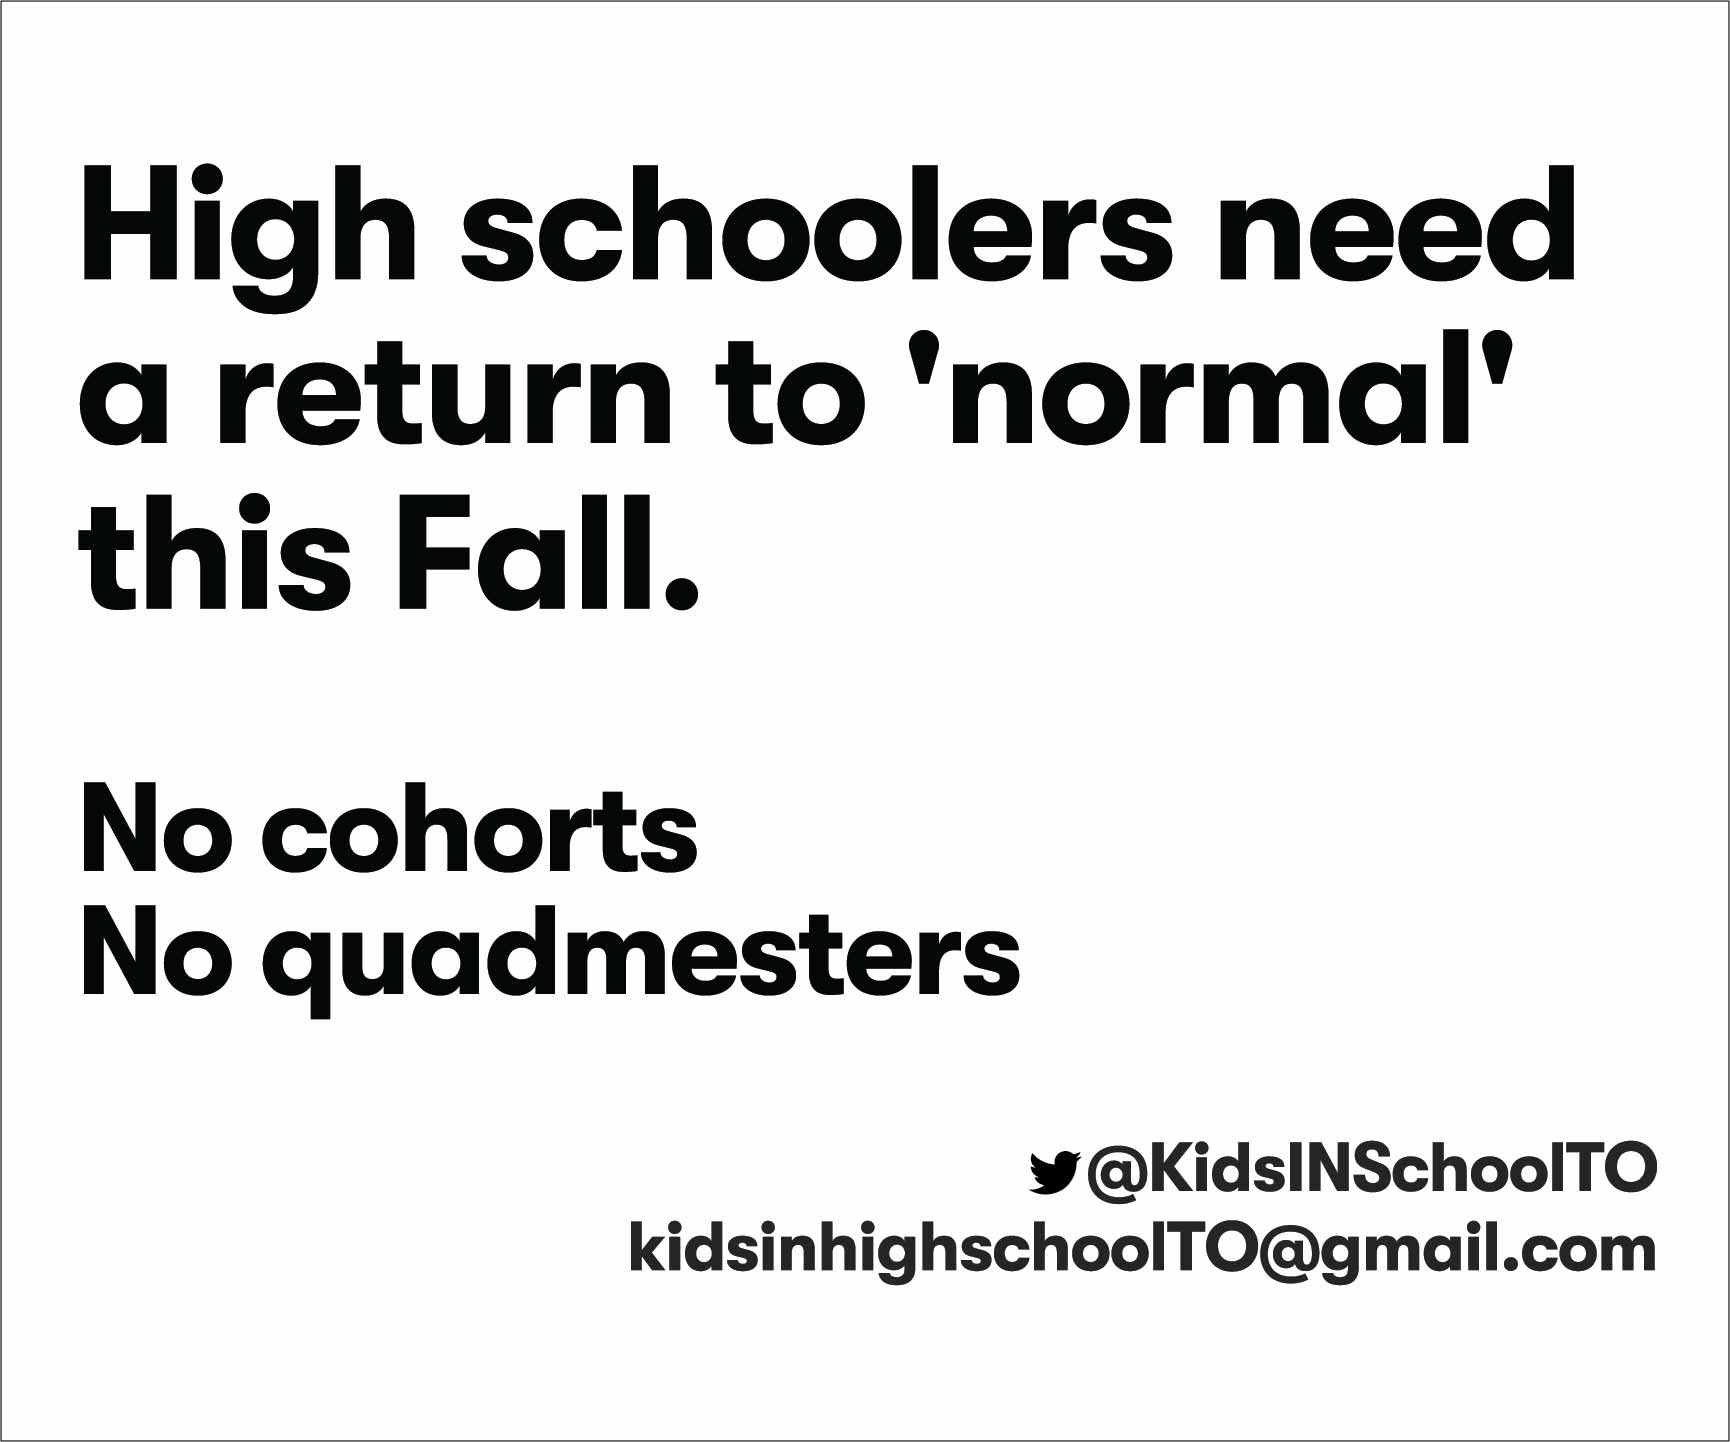 High Schoolers need a return to normal this Fall lawn bag signs yard signs No cohorts No quadmesters